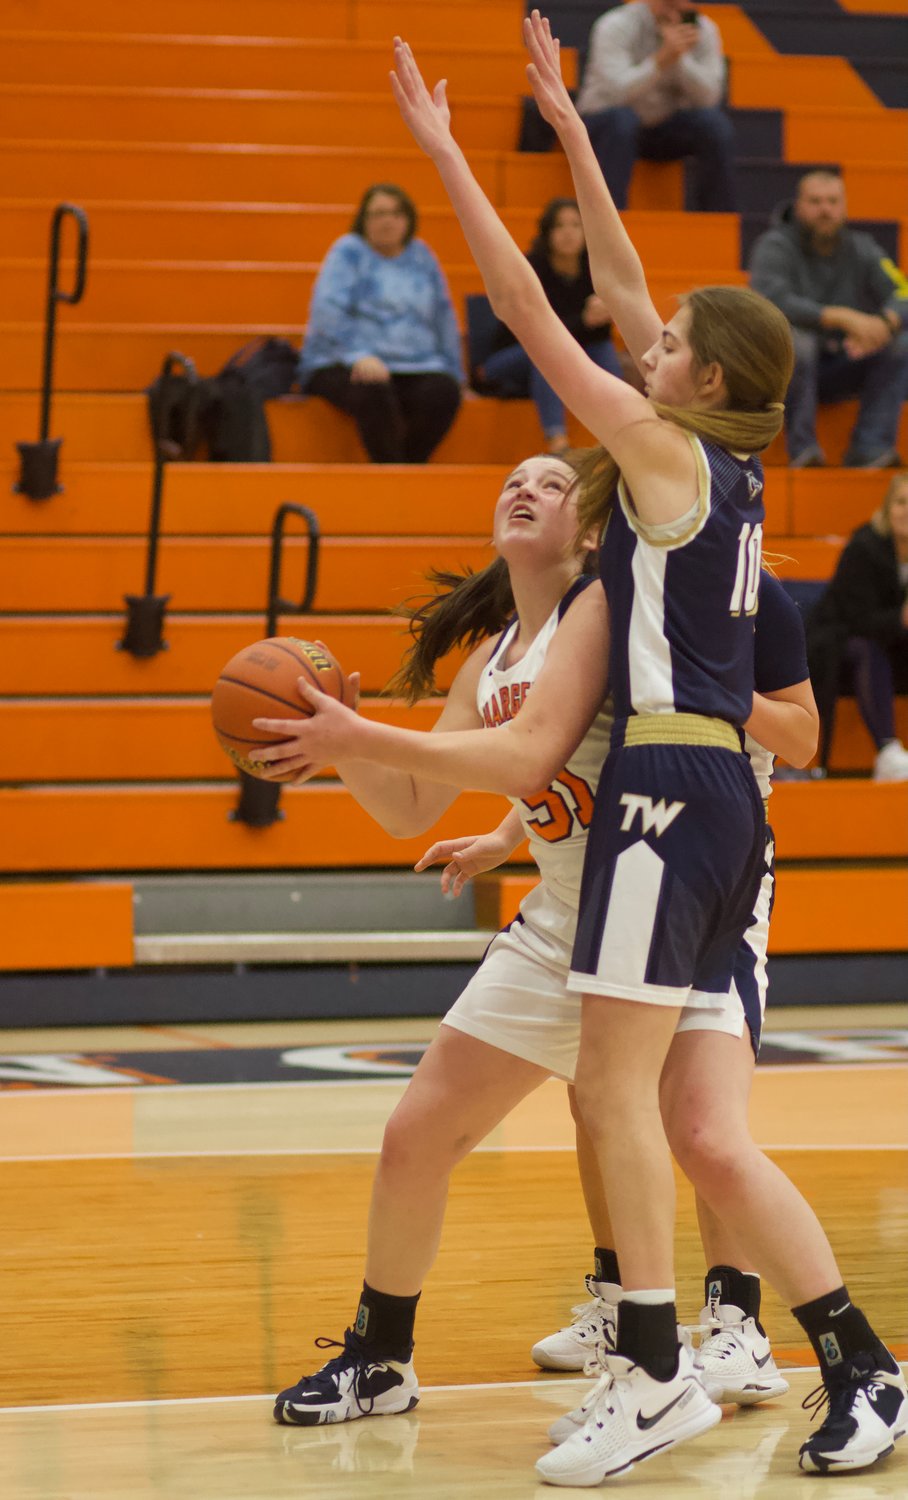 Katie Rice led the Chargers with 6 points in their 66-18 loss vs Tri-West.